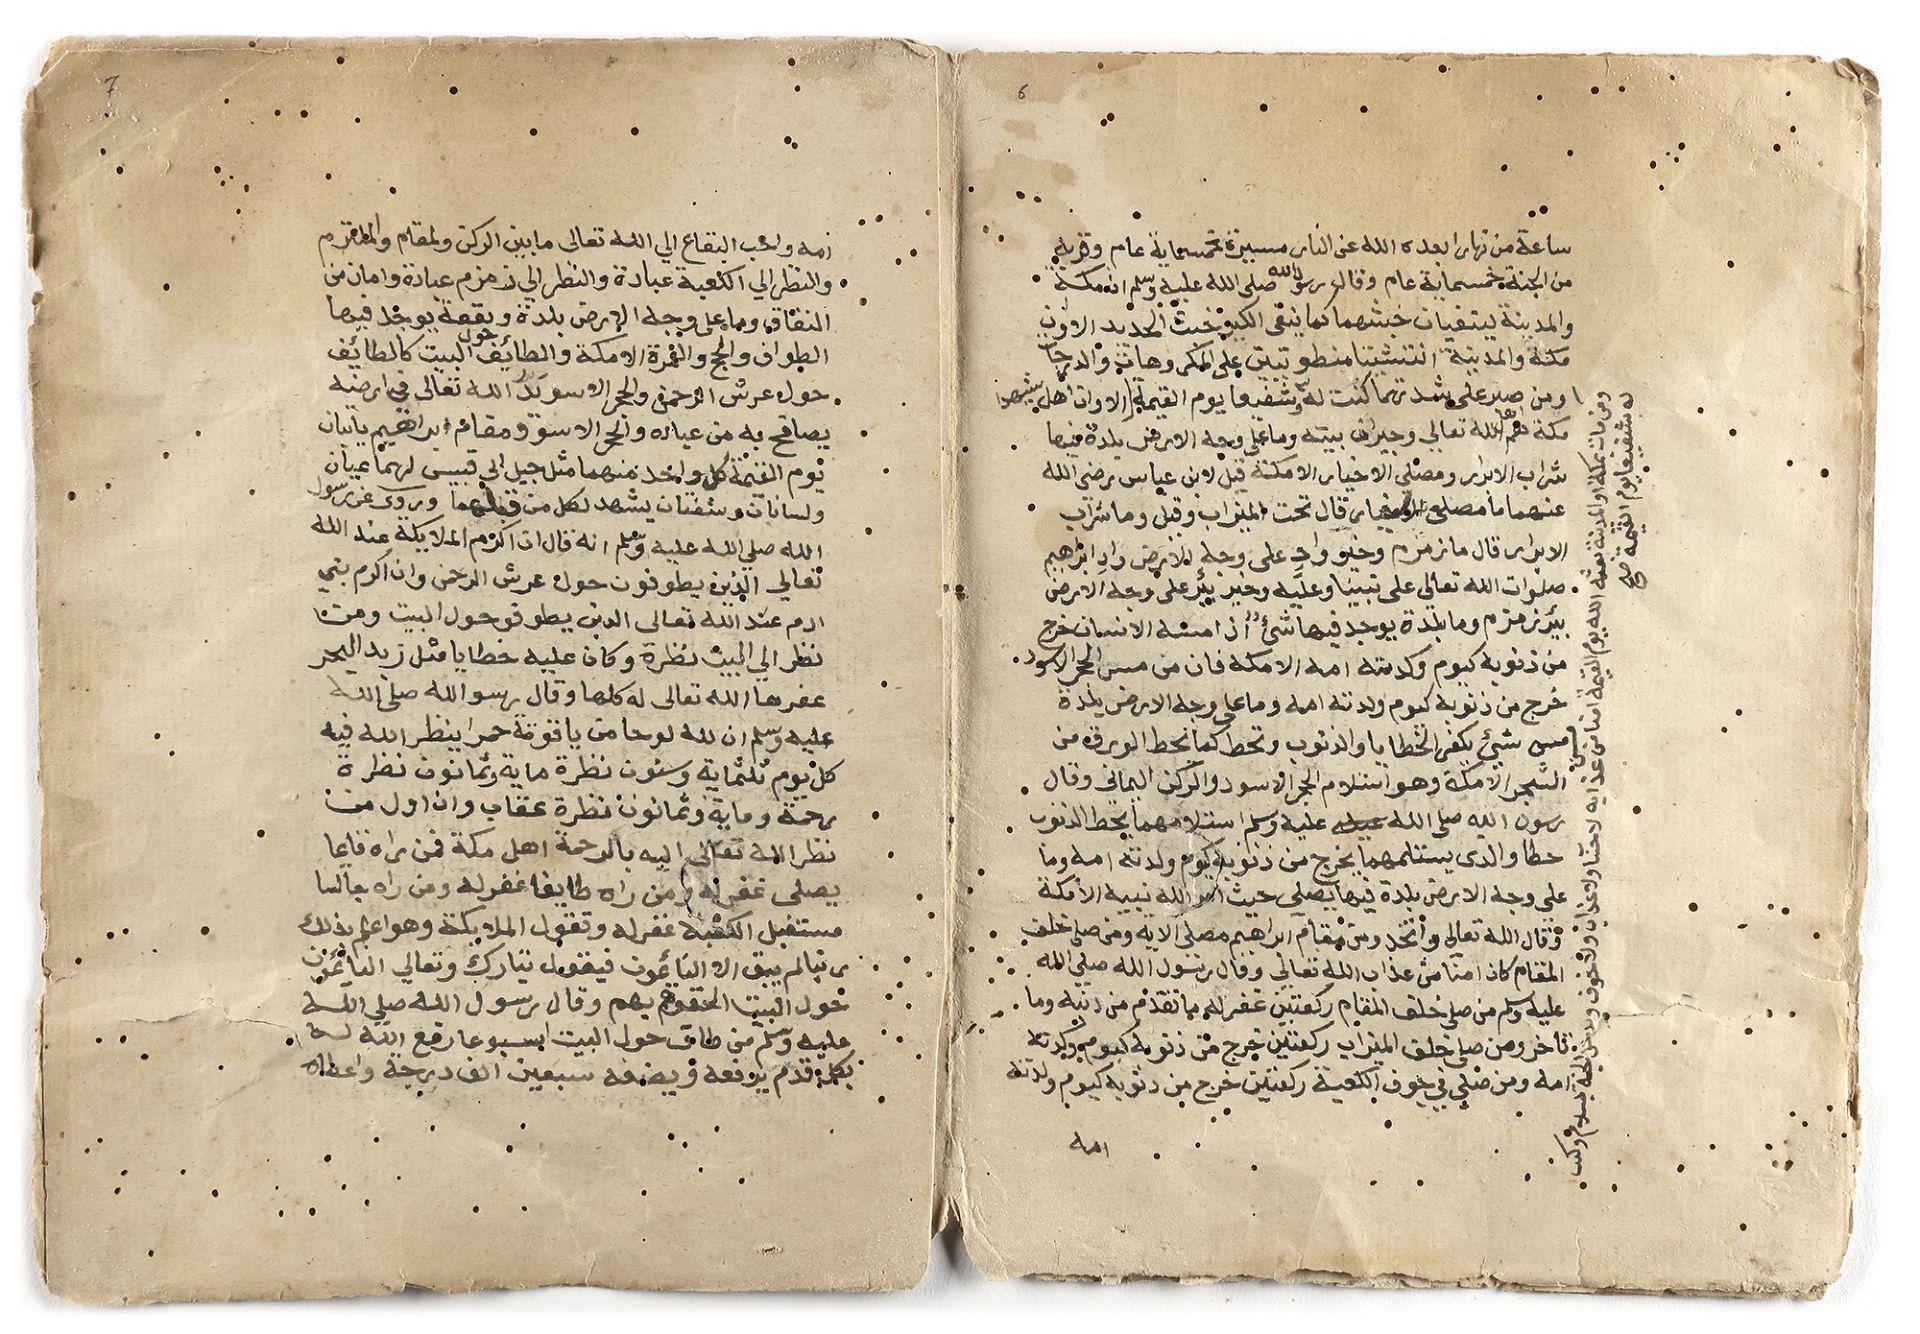 A CHAPTER ABOUT THE MERITS OF MECCA BY IBRAHIM IBN AHMED AL-SHAFI'I, IN MECCA AND DATED 1267 AH/1850 - Bild 3 aus 4